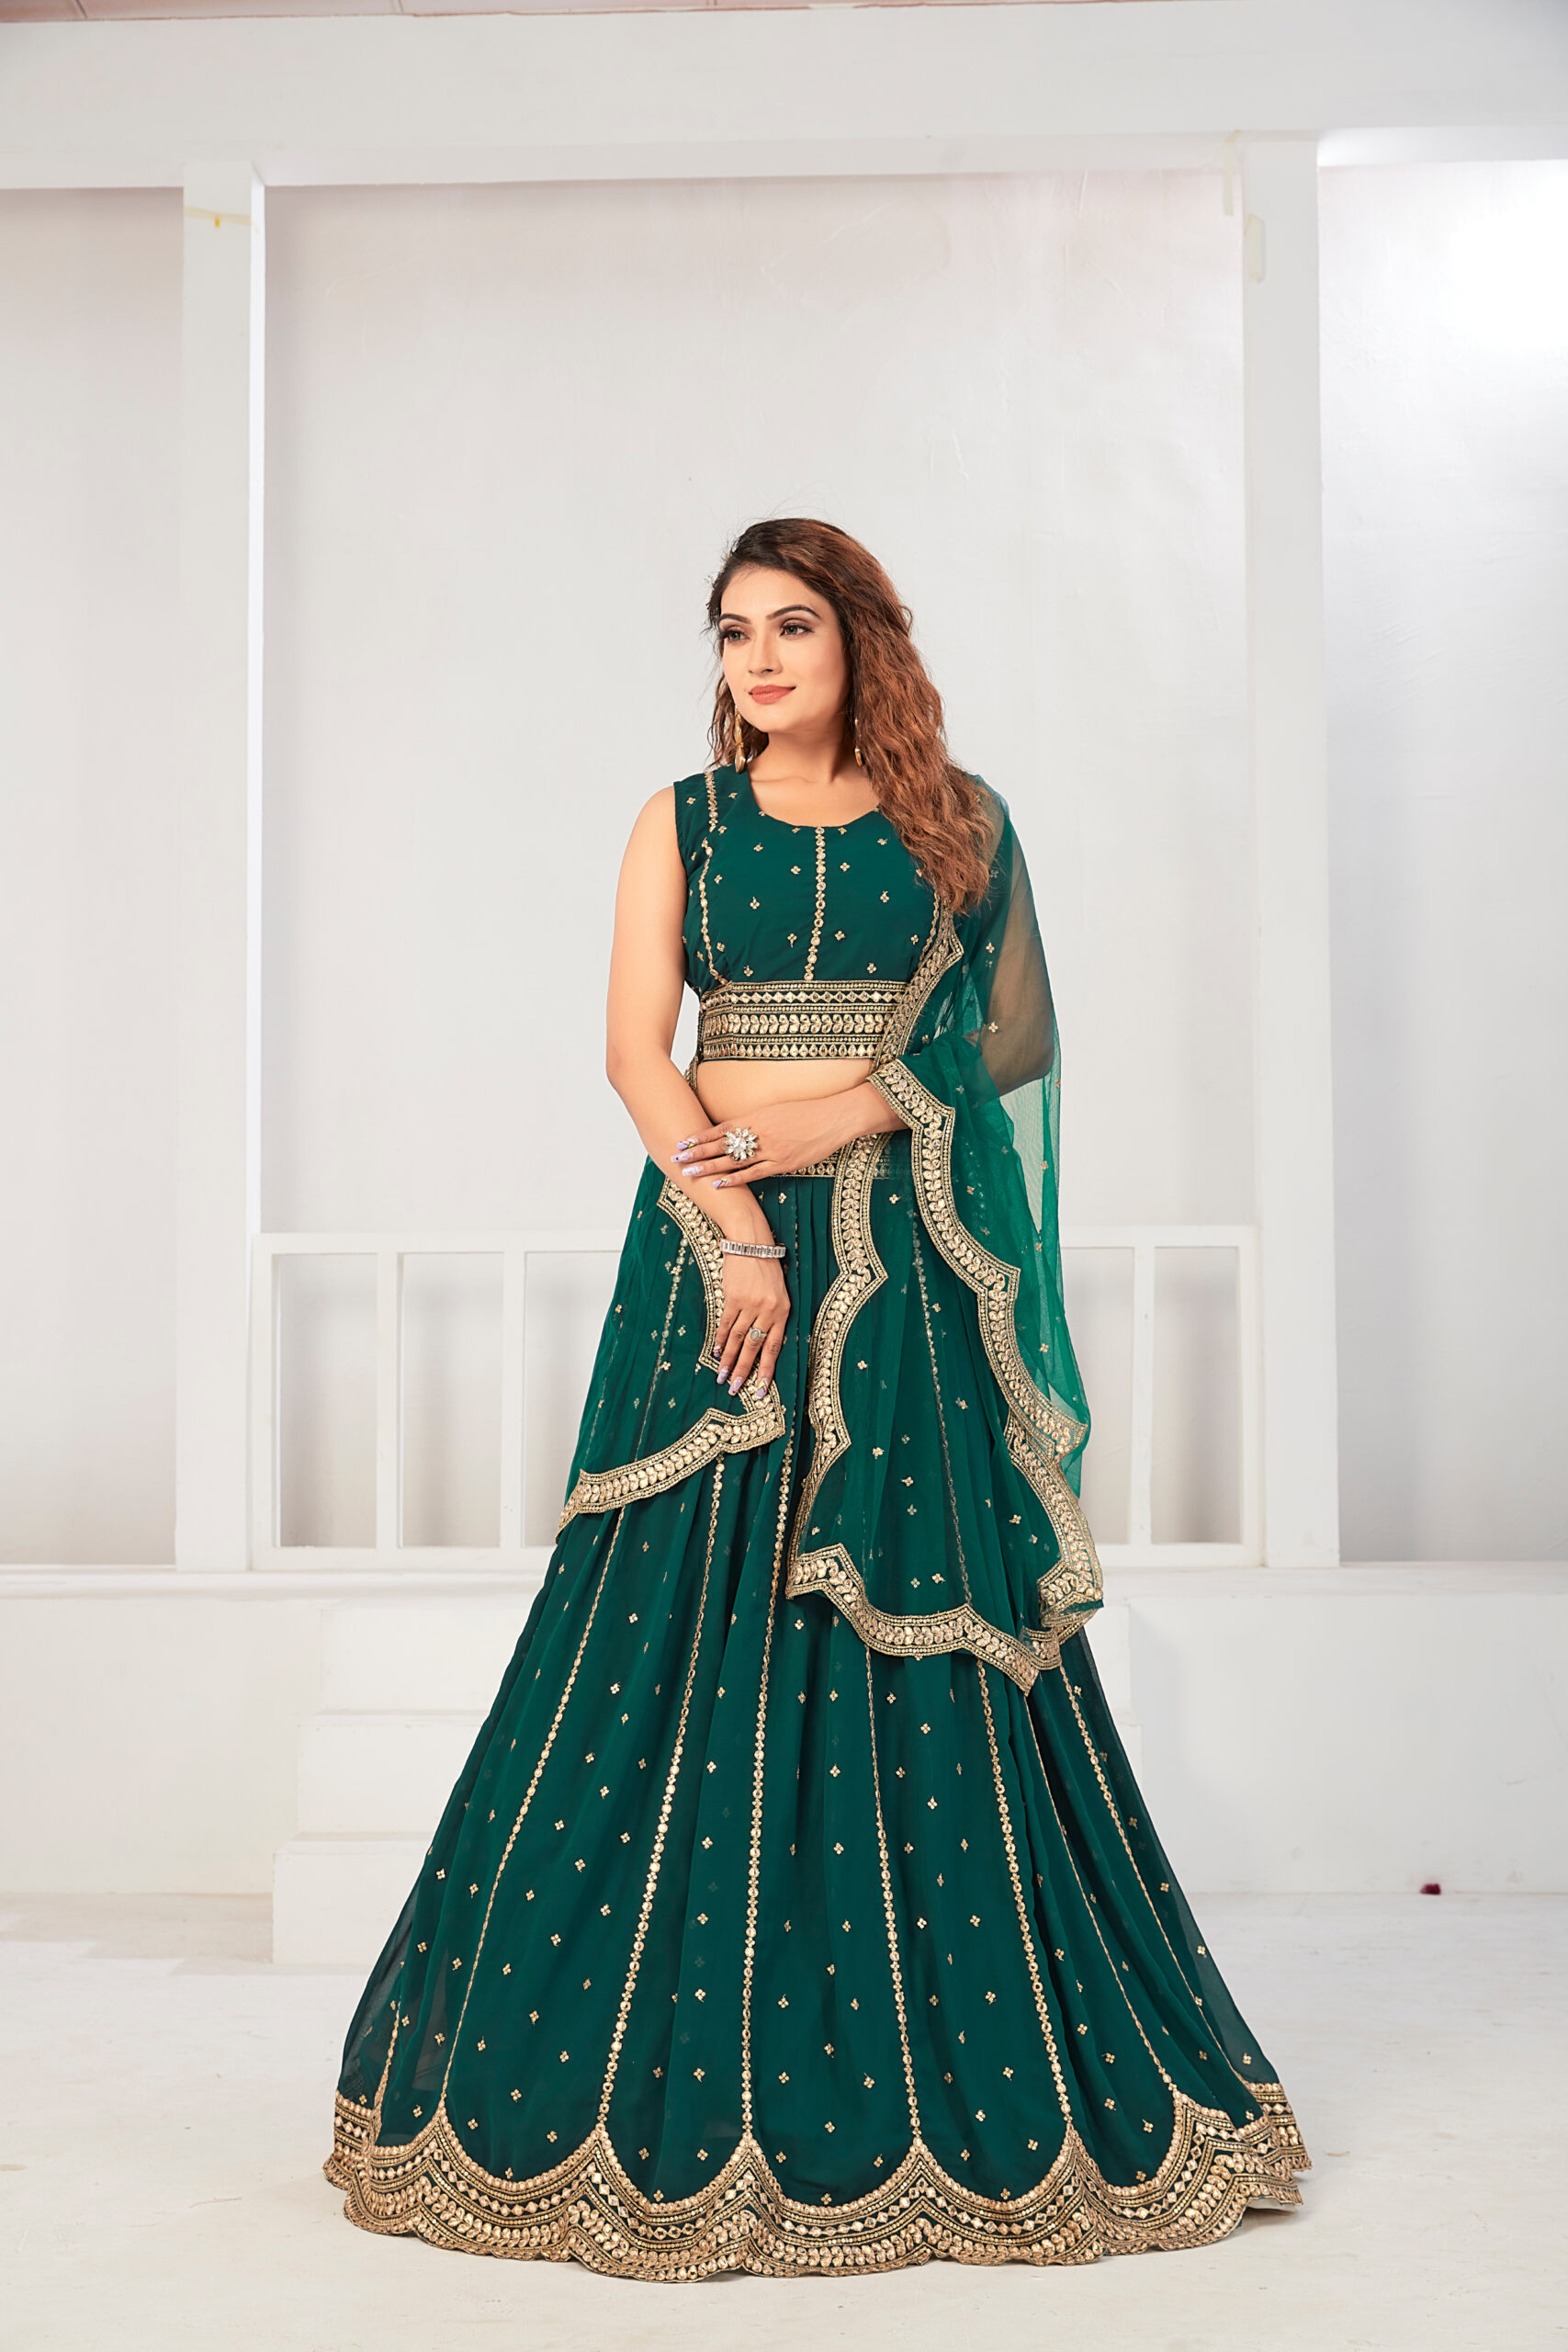 Monalisa sarees Bollywood Designer Sarees - Latest South Asian Wedding  trends for 2024 with Monalisasarees! We Bringing traditional Lehengas With  A Modern Twist !Monalisasarees invites you to explore our 2024 lehenga  collection,